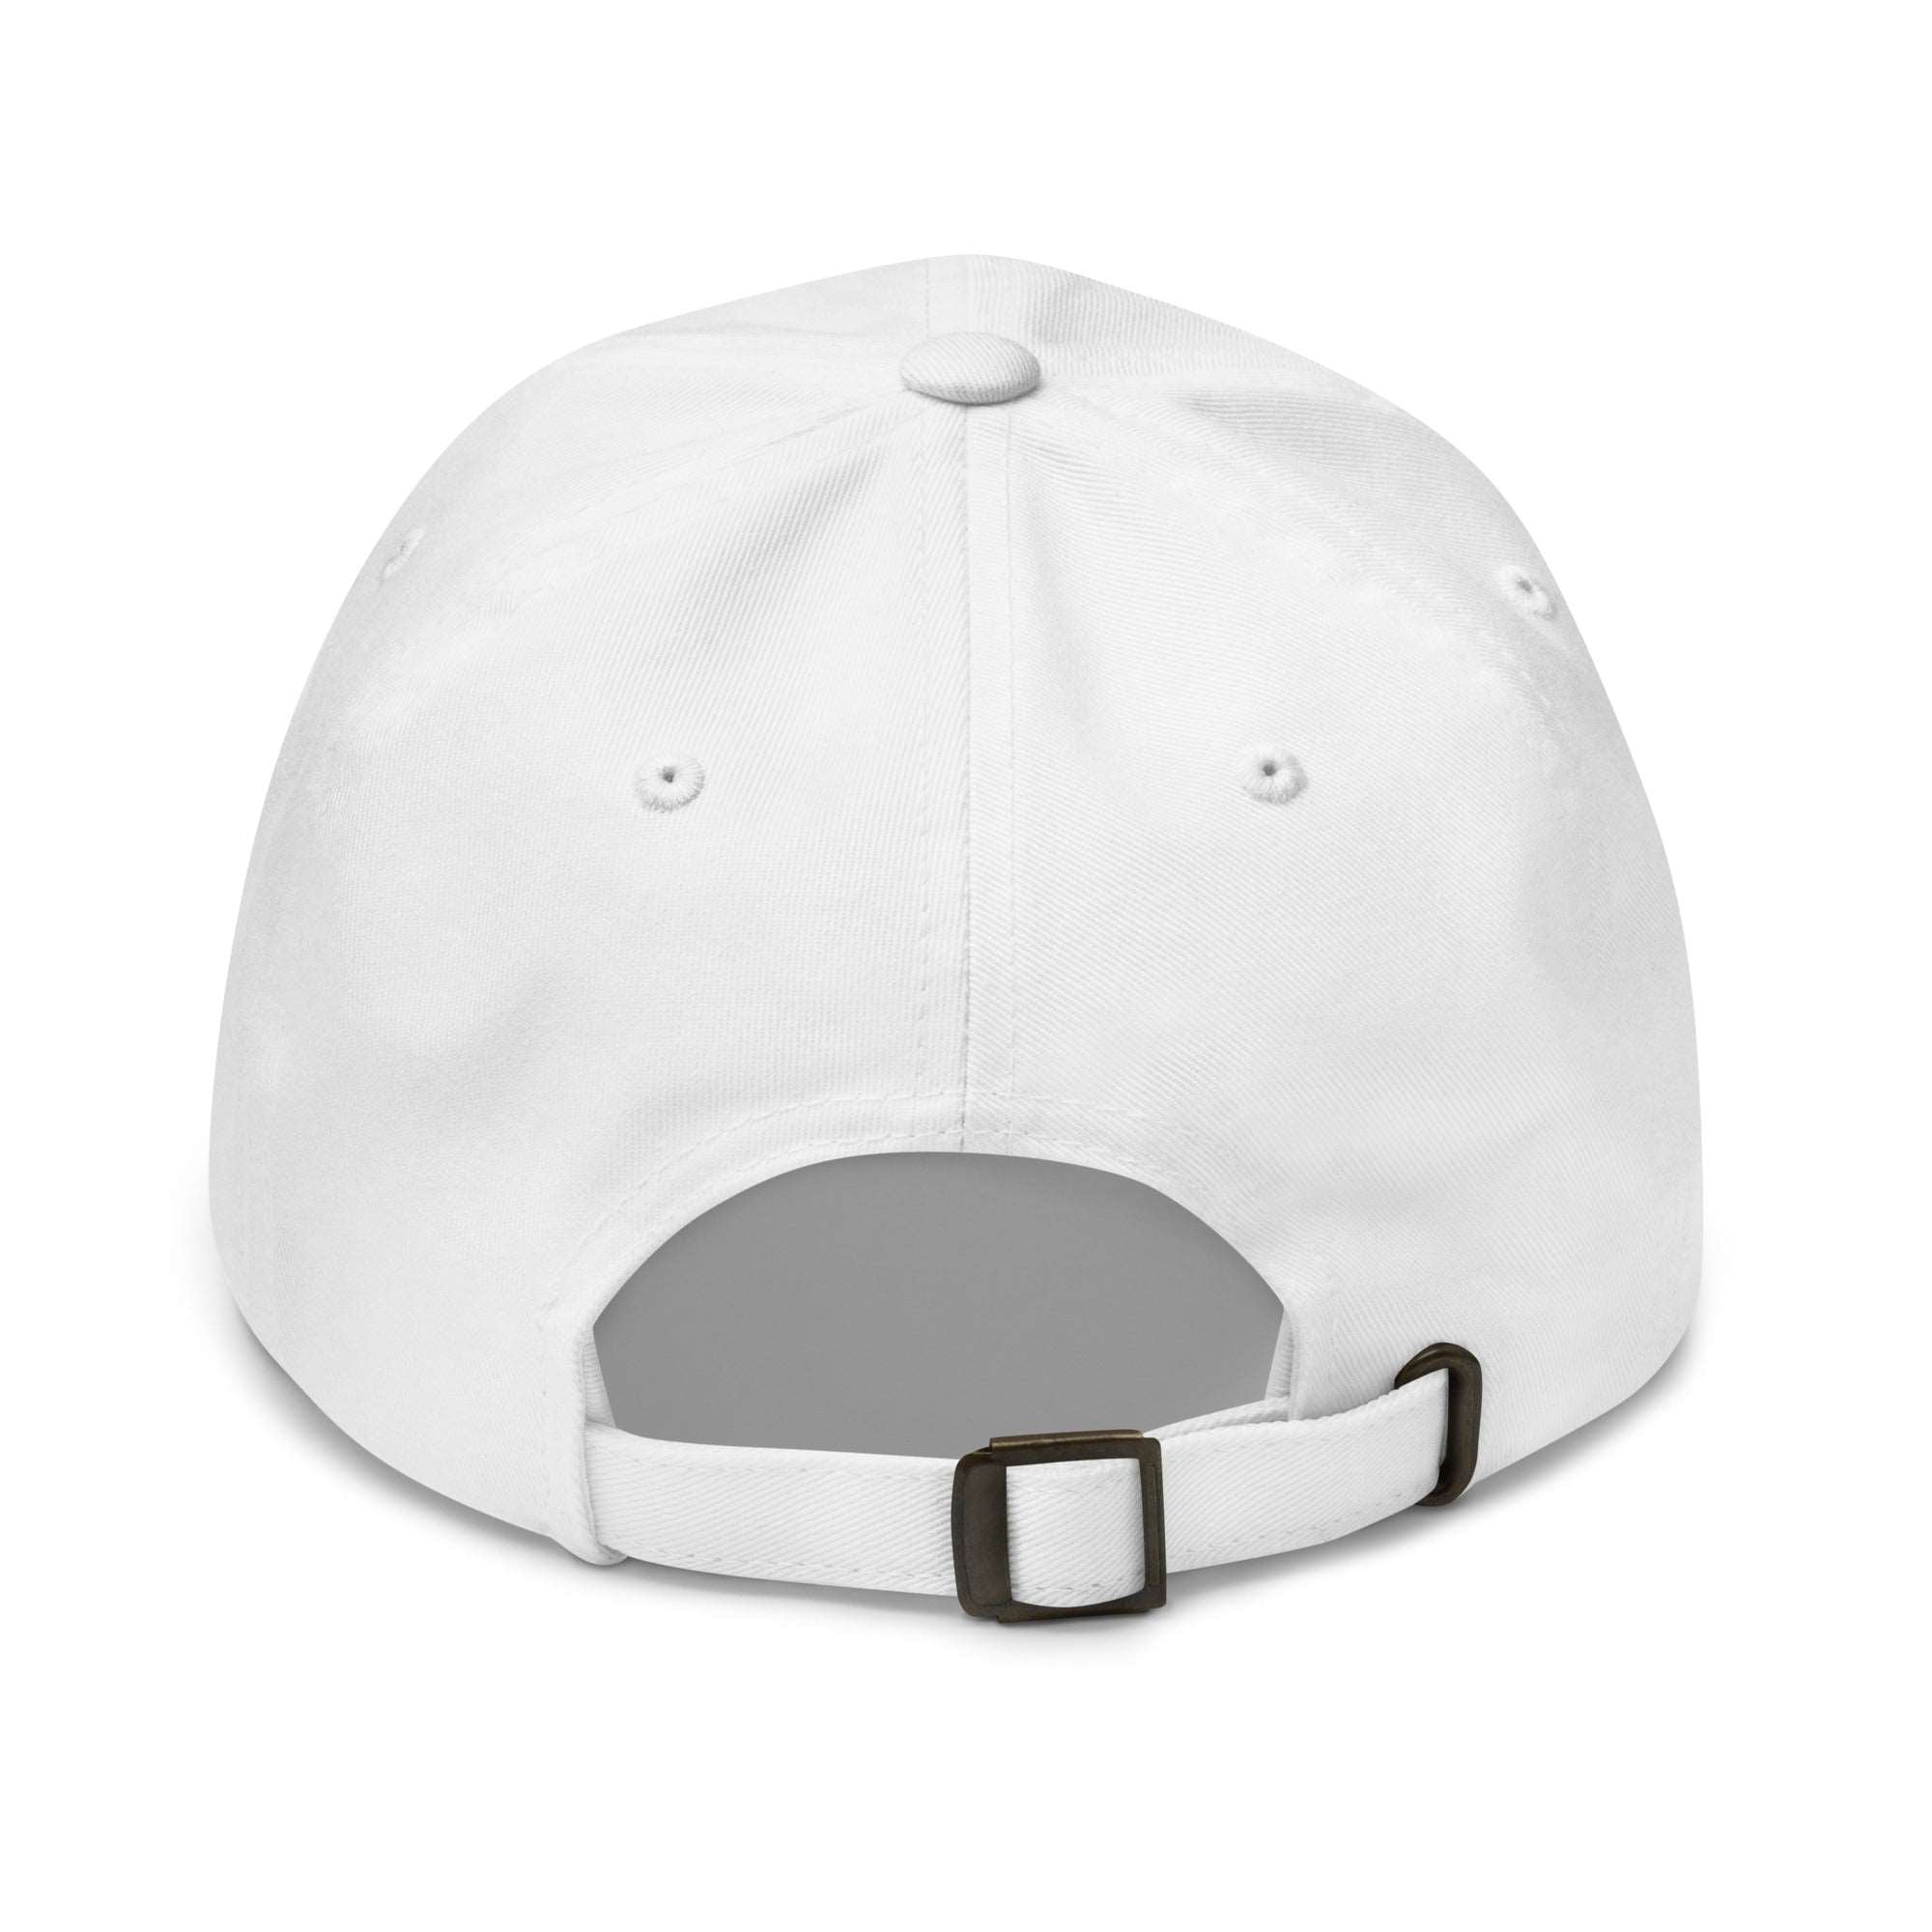 Shiny and Chrome Dad hat